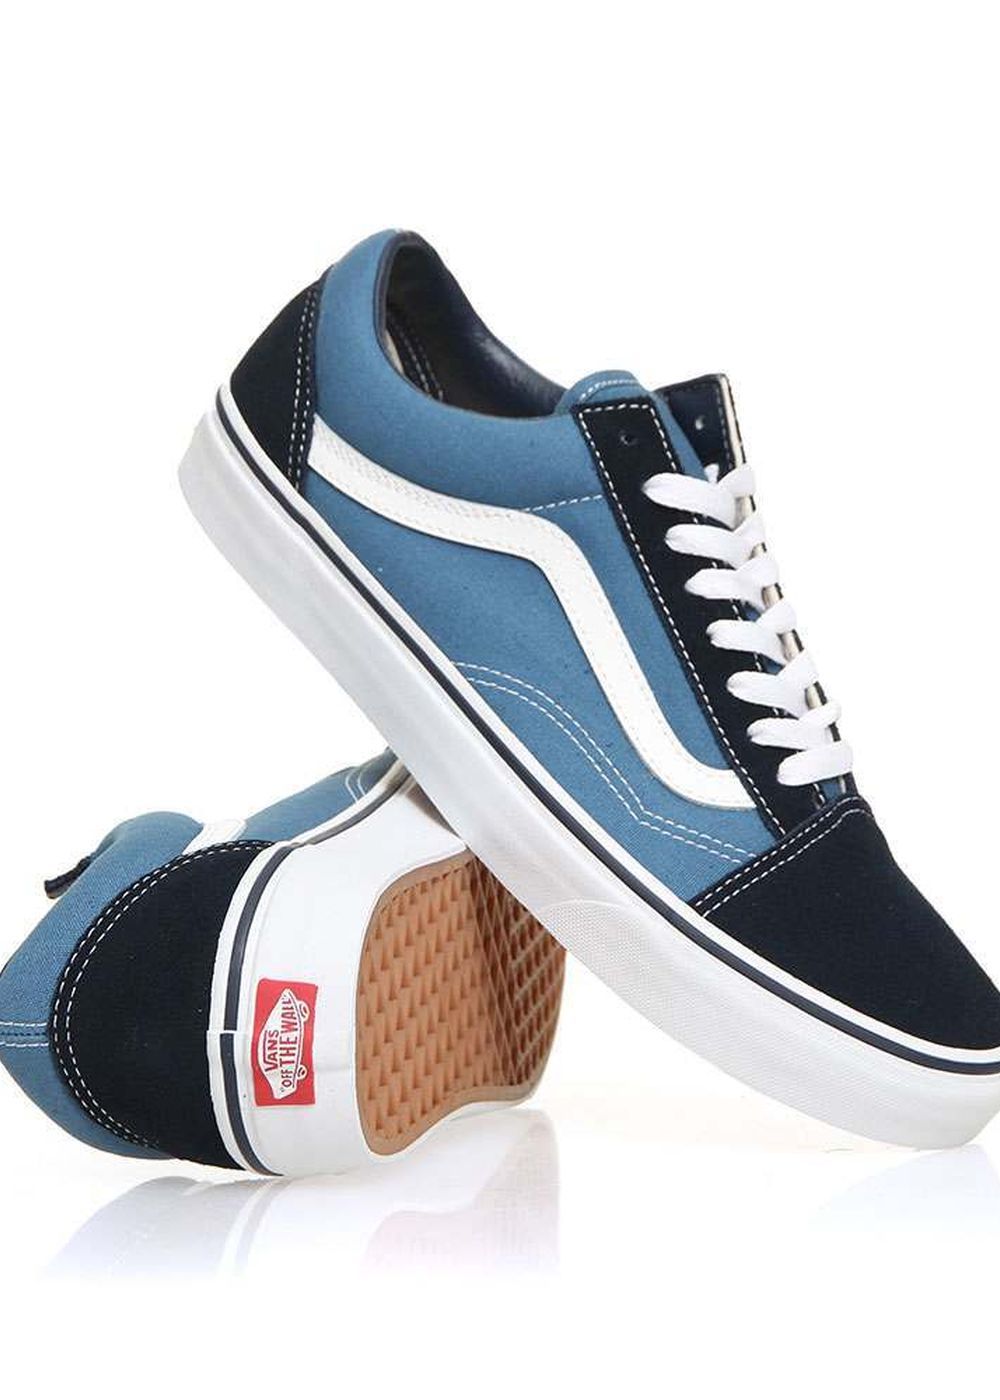 vans off the wall shoes black and blue